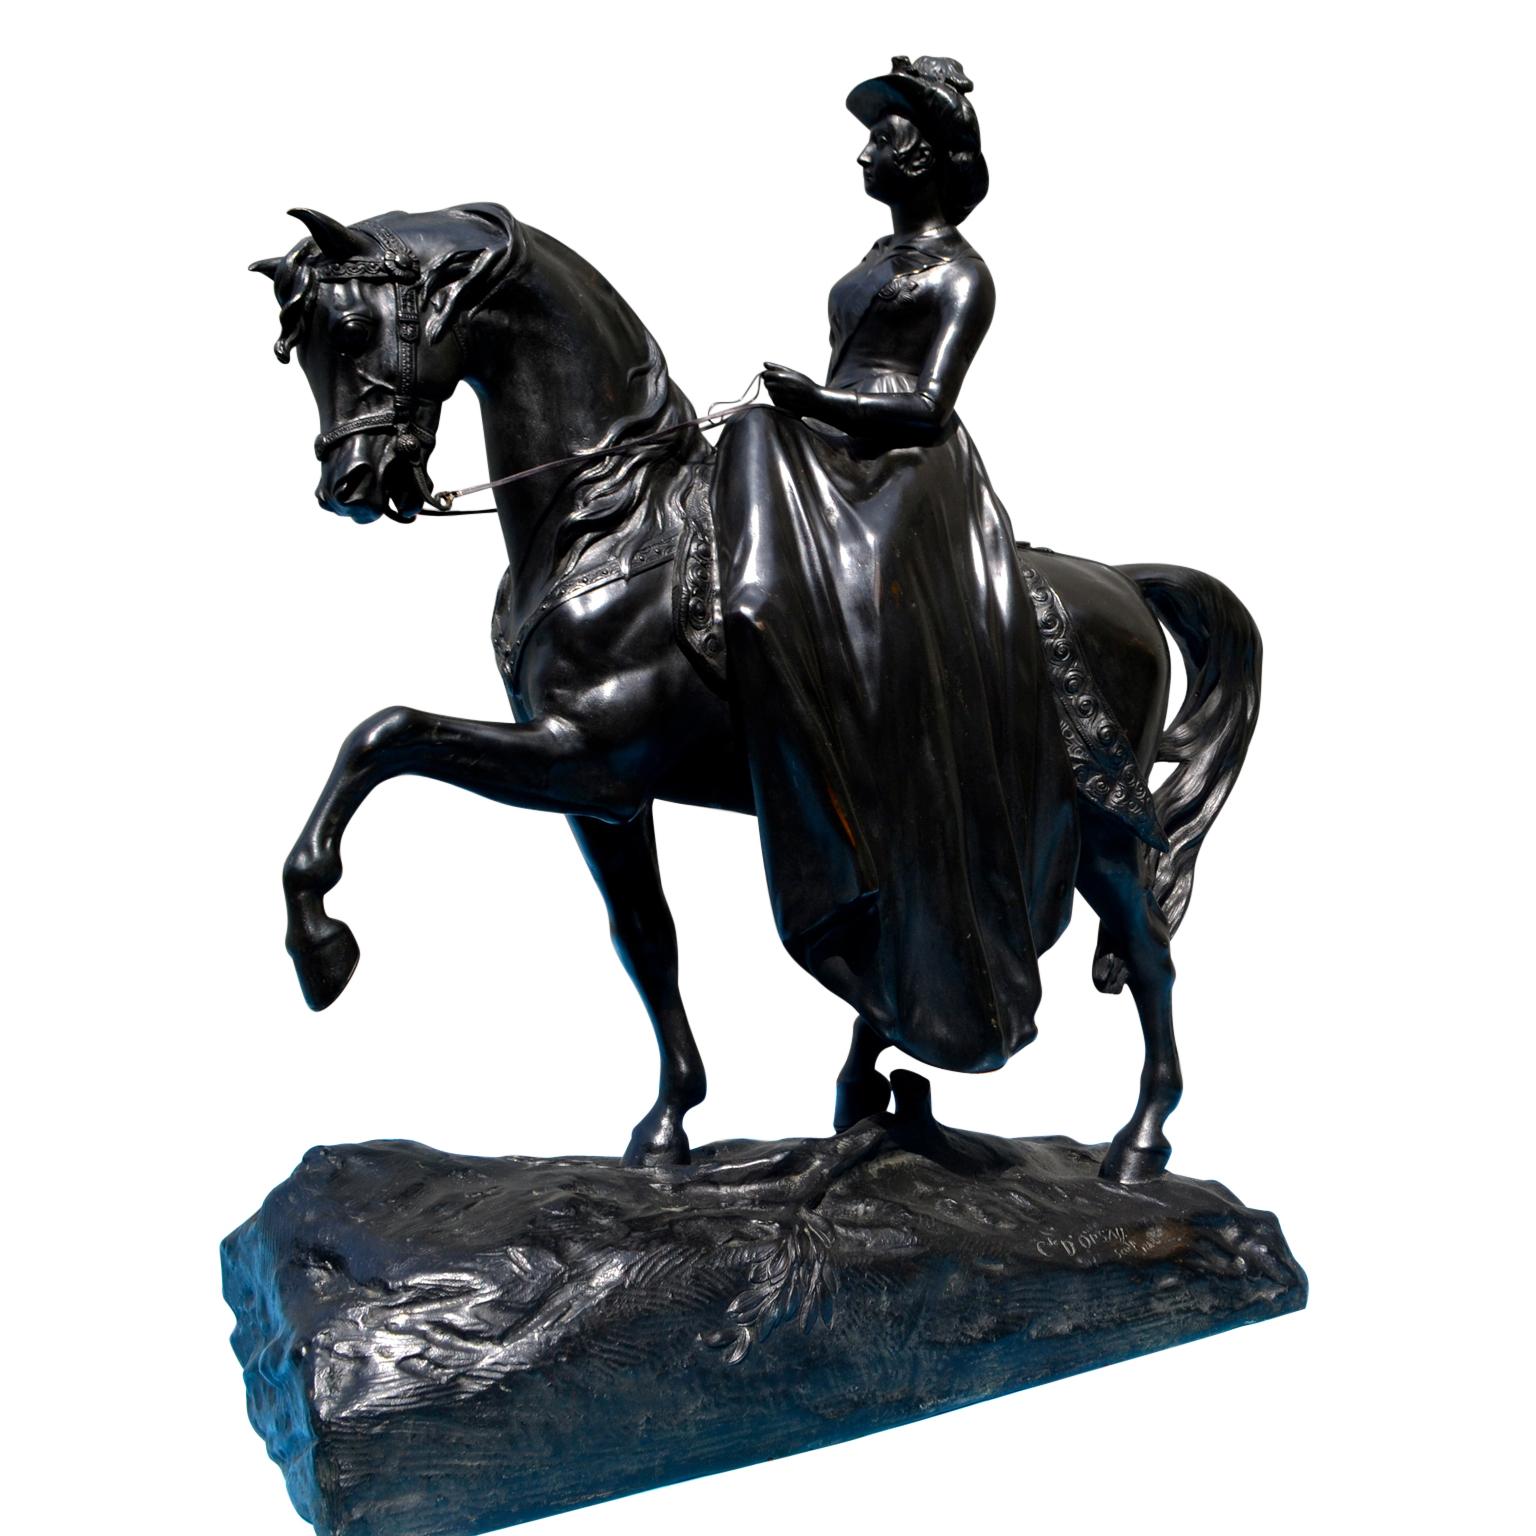 A rare beautifully cast equestrian bronze statue by a French noble Alfred-Guillaume-Gabriel, Count d’Orsay of her Majesty a young Queen Victoria riding side saddle on a prancing Arab Stallion; mounted upon a base of naturalistic form; signed Cte